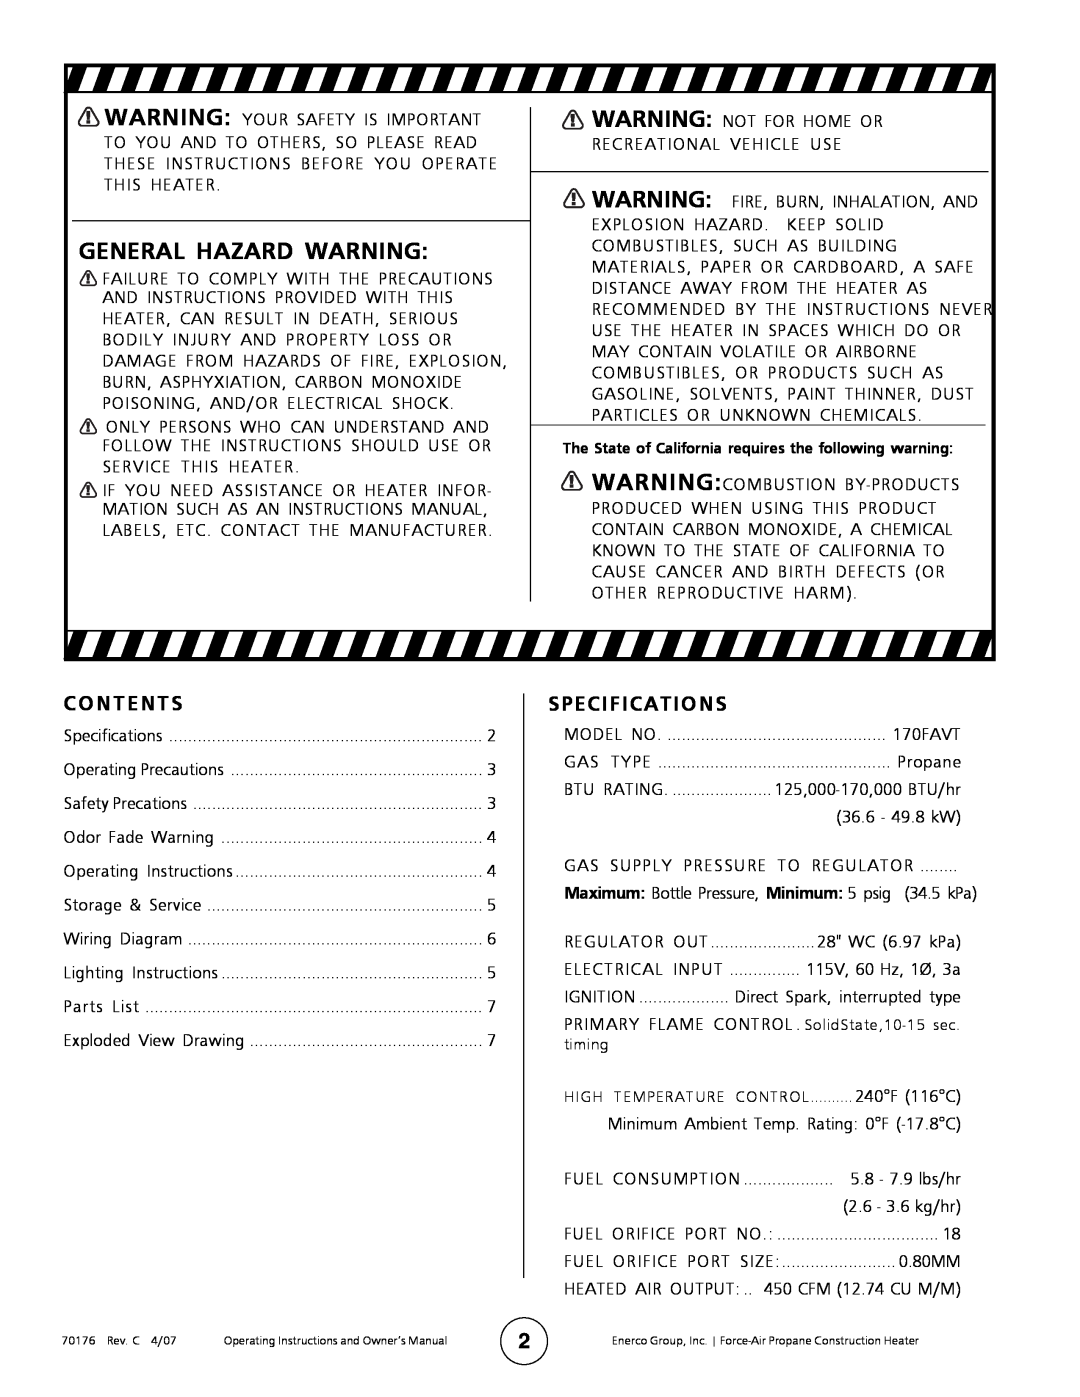 Enerco MH170FAVT operating instructions General Hazard Warning, Contents, Specifications 